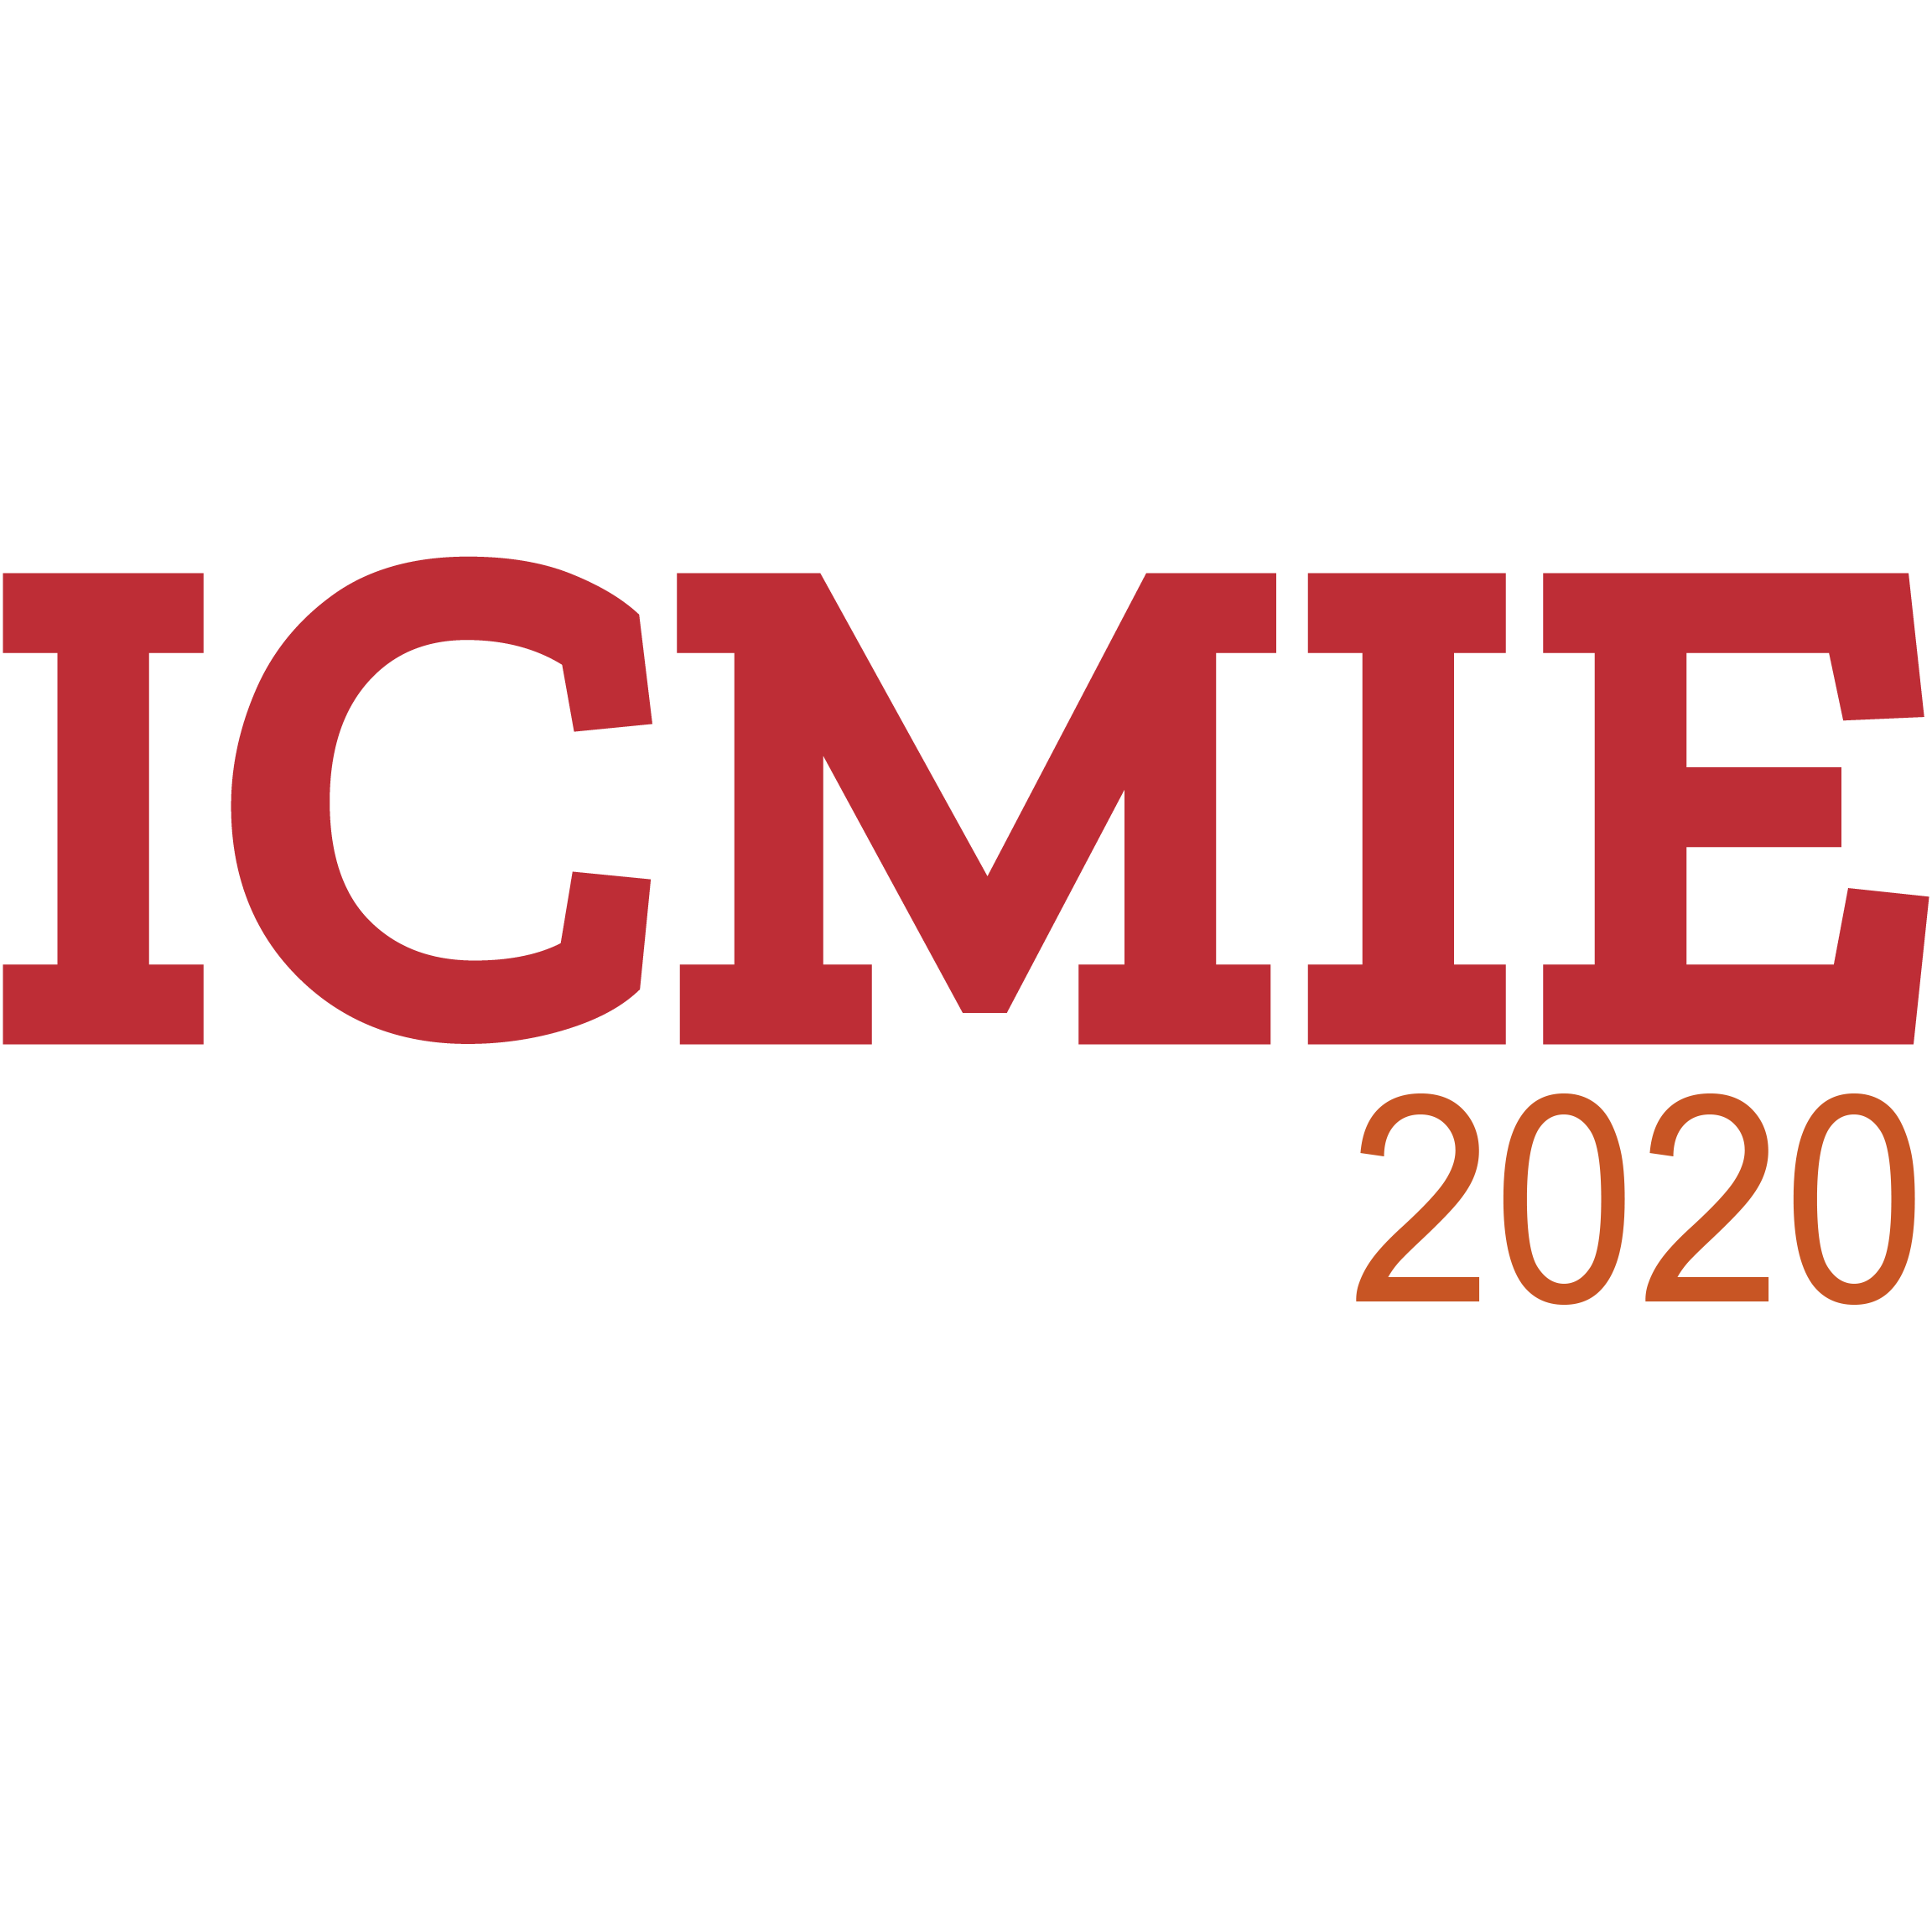 9th International Conference on Mechanics and Industrial Engineering (ICMIE’20)